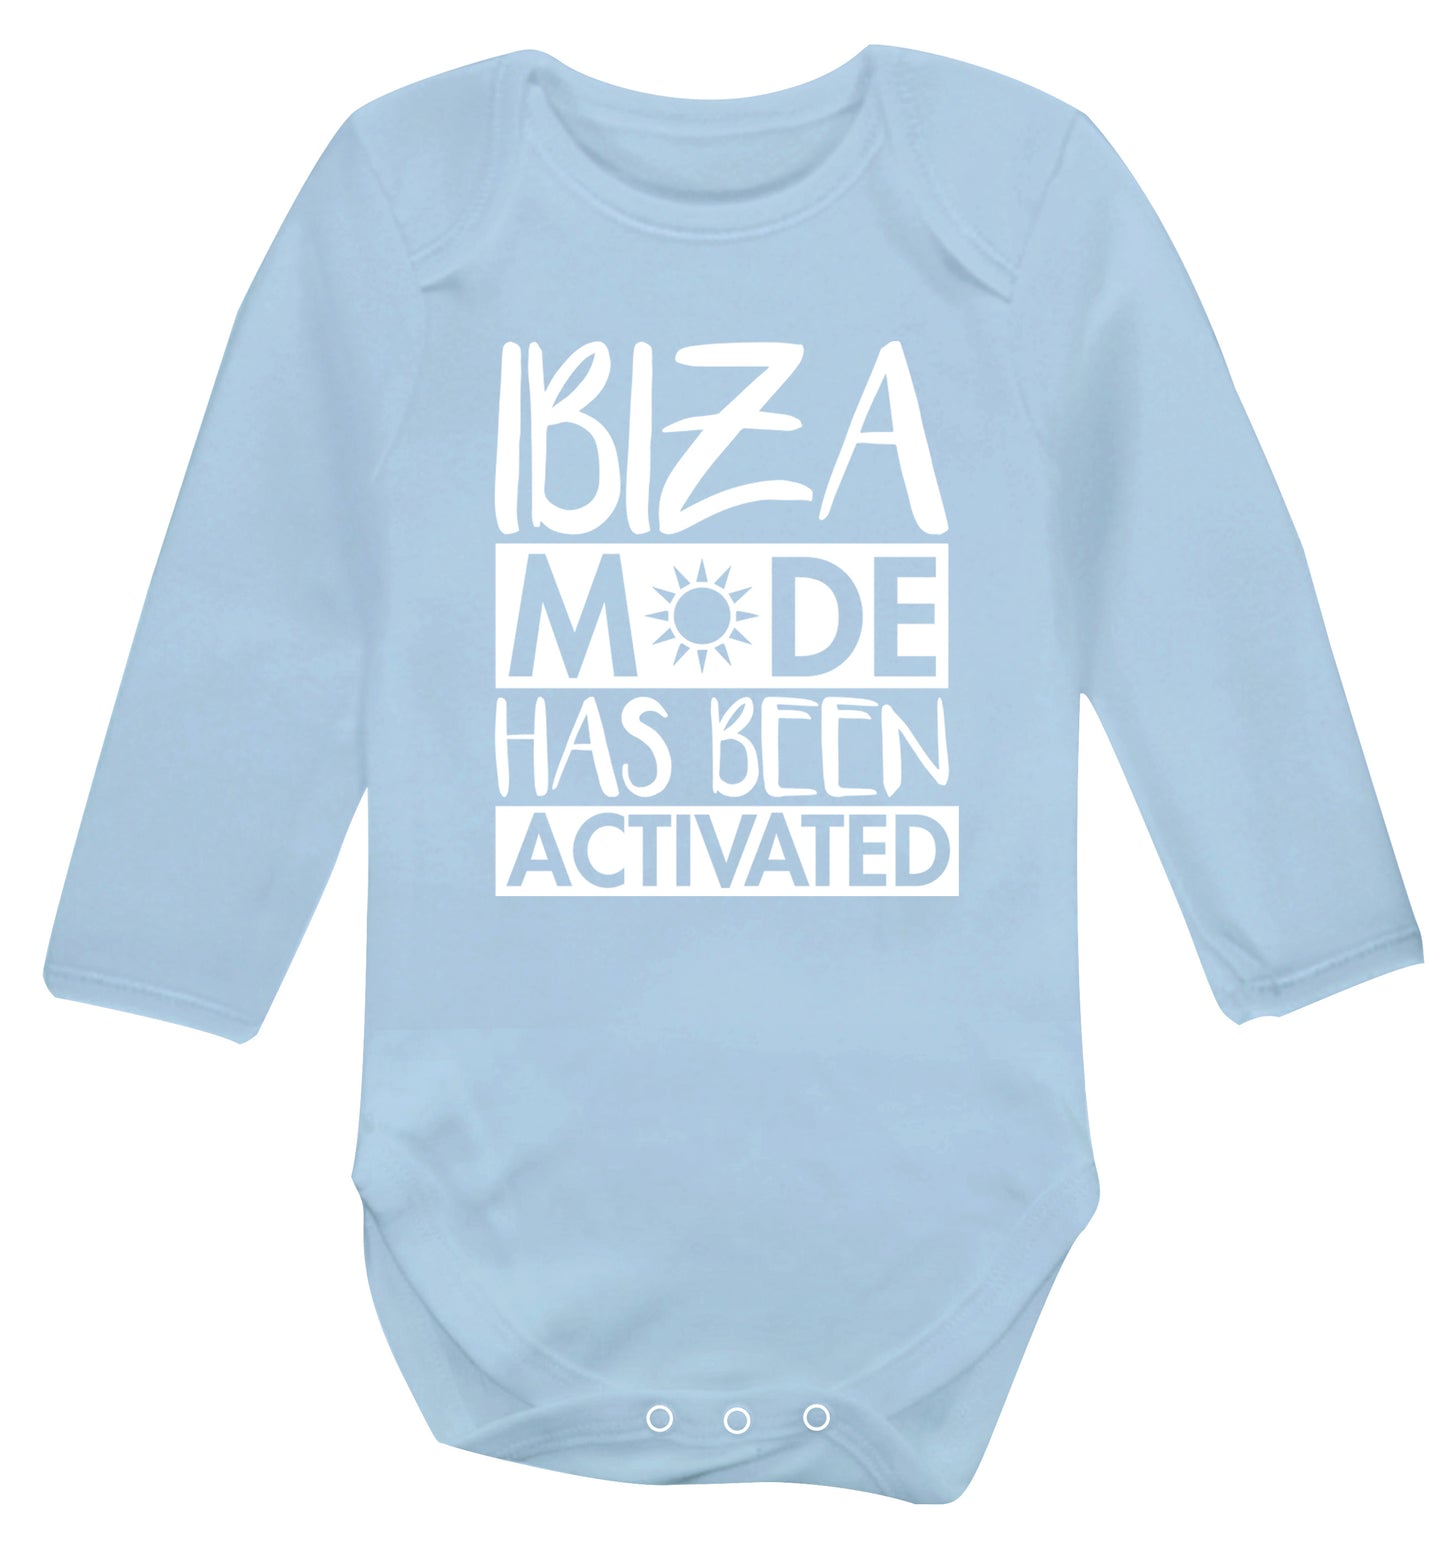 Ibiza mode has been activated Baby Vest long sleeved pale blue 6-12 months